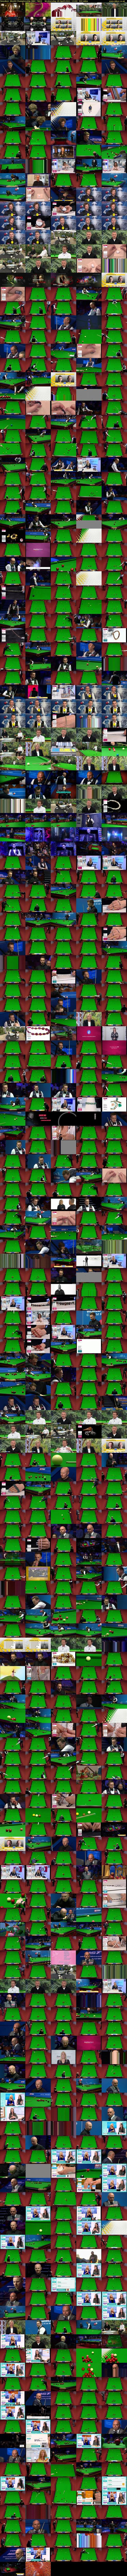 Snooker: World Championship (BBC TWO) Wednesday 28 April 2021 13:00 - 18:00